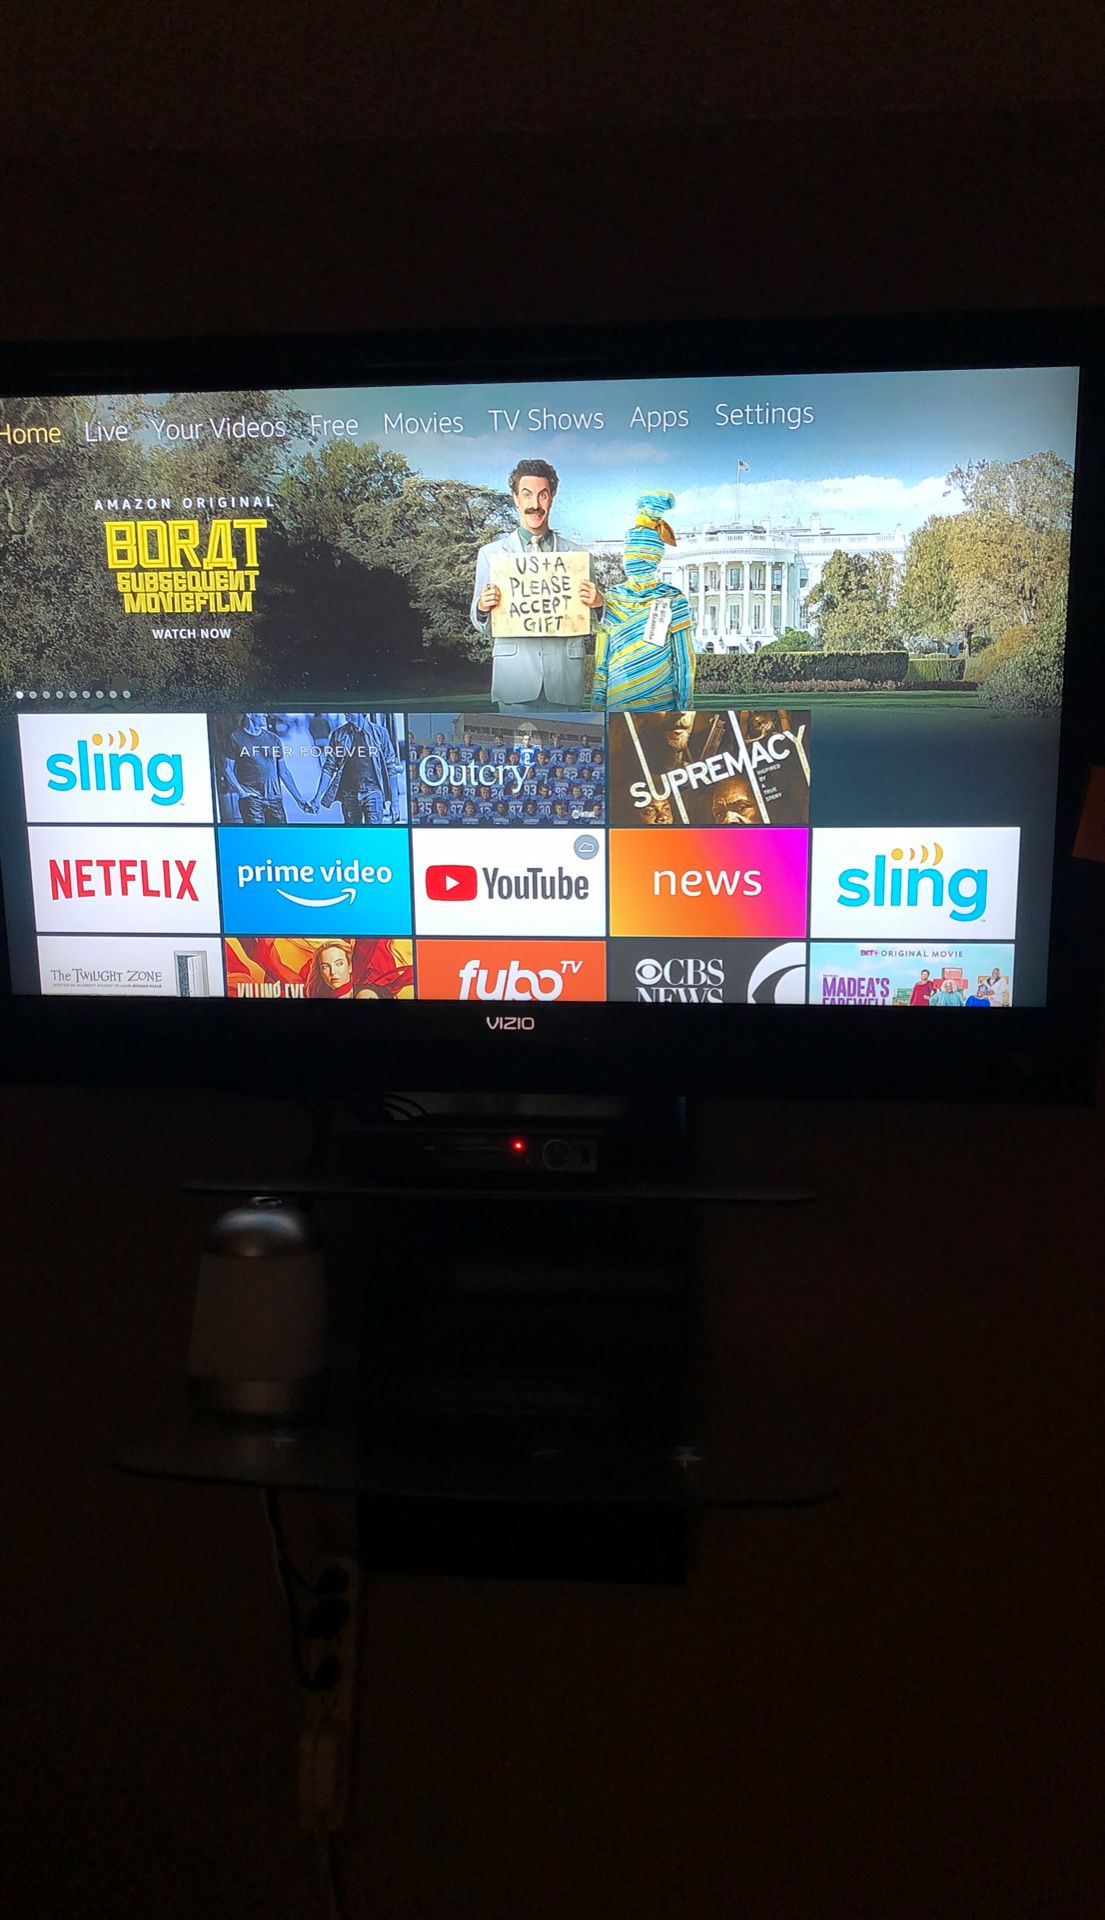 Vizio smart tv 42 inch with wall mount